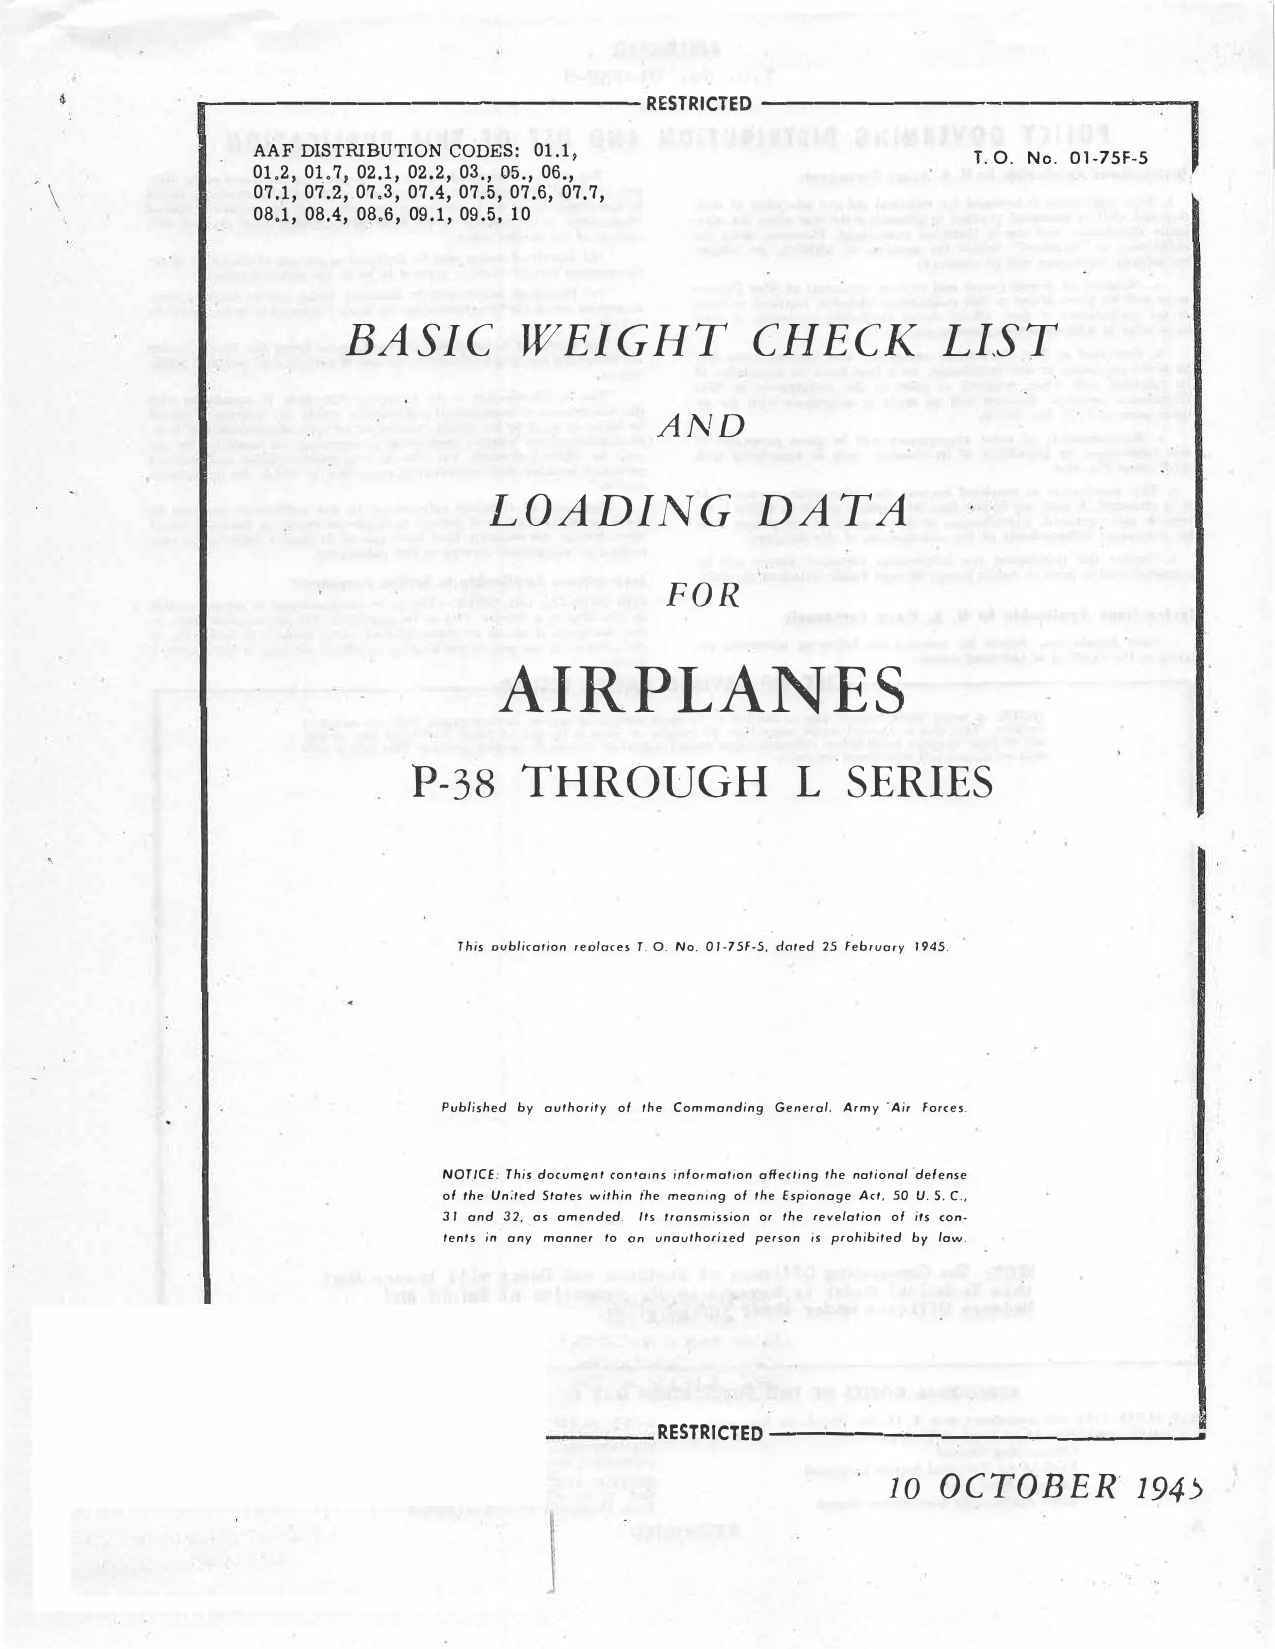 Sample page 1 from AirCorps Library document: Basic Weight Check List and Loading Data - P-38